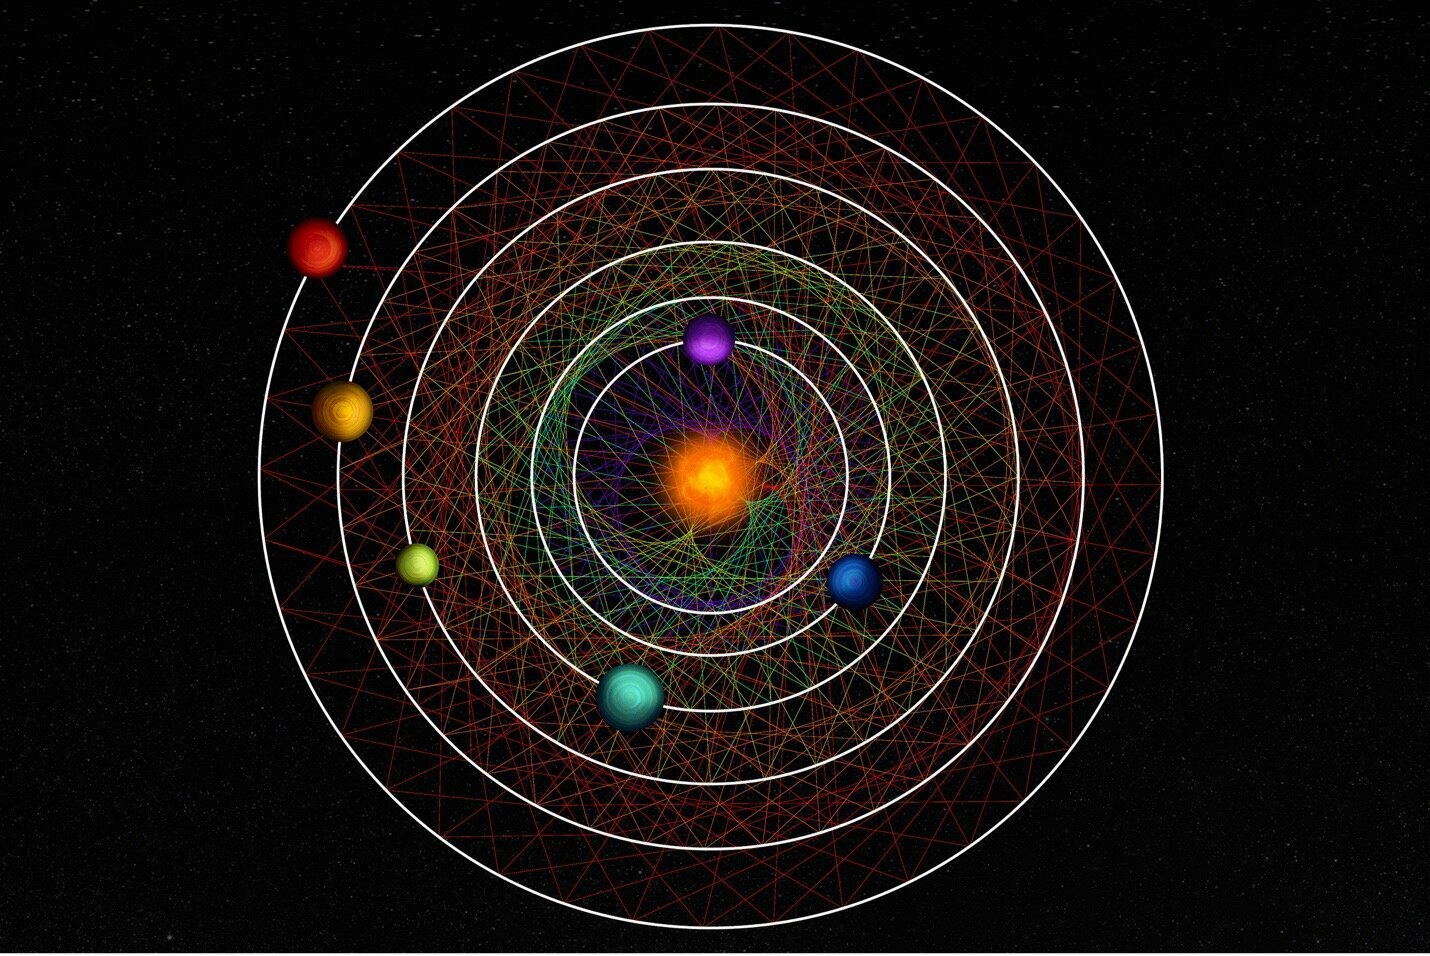 Six exoplanets orbiting a star